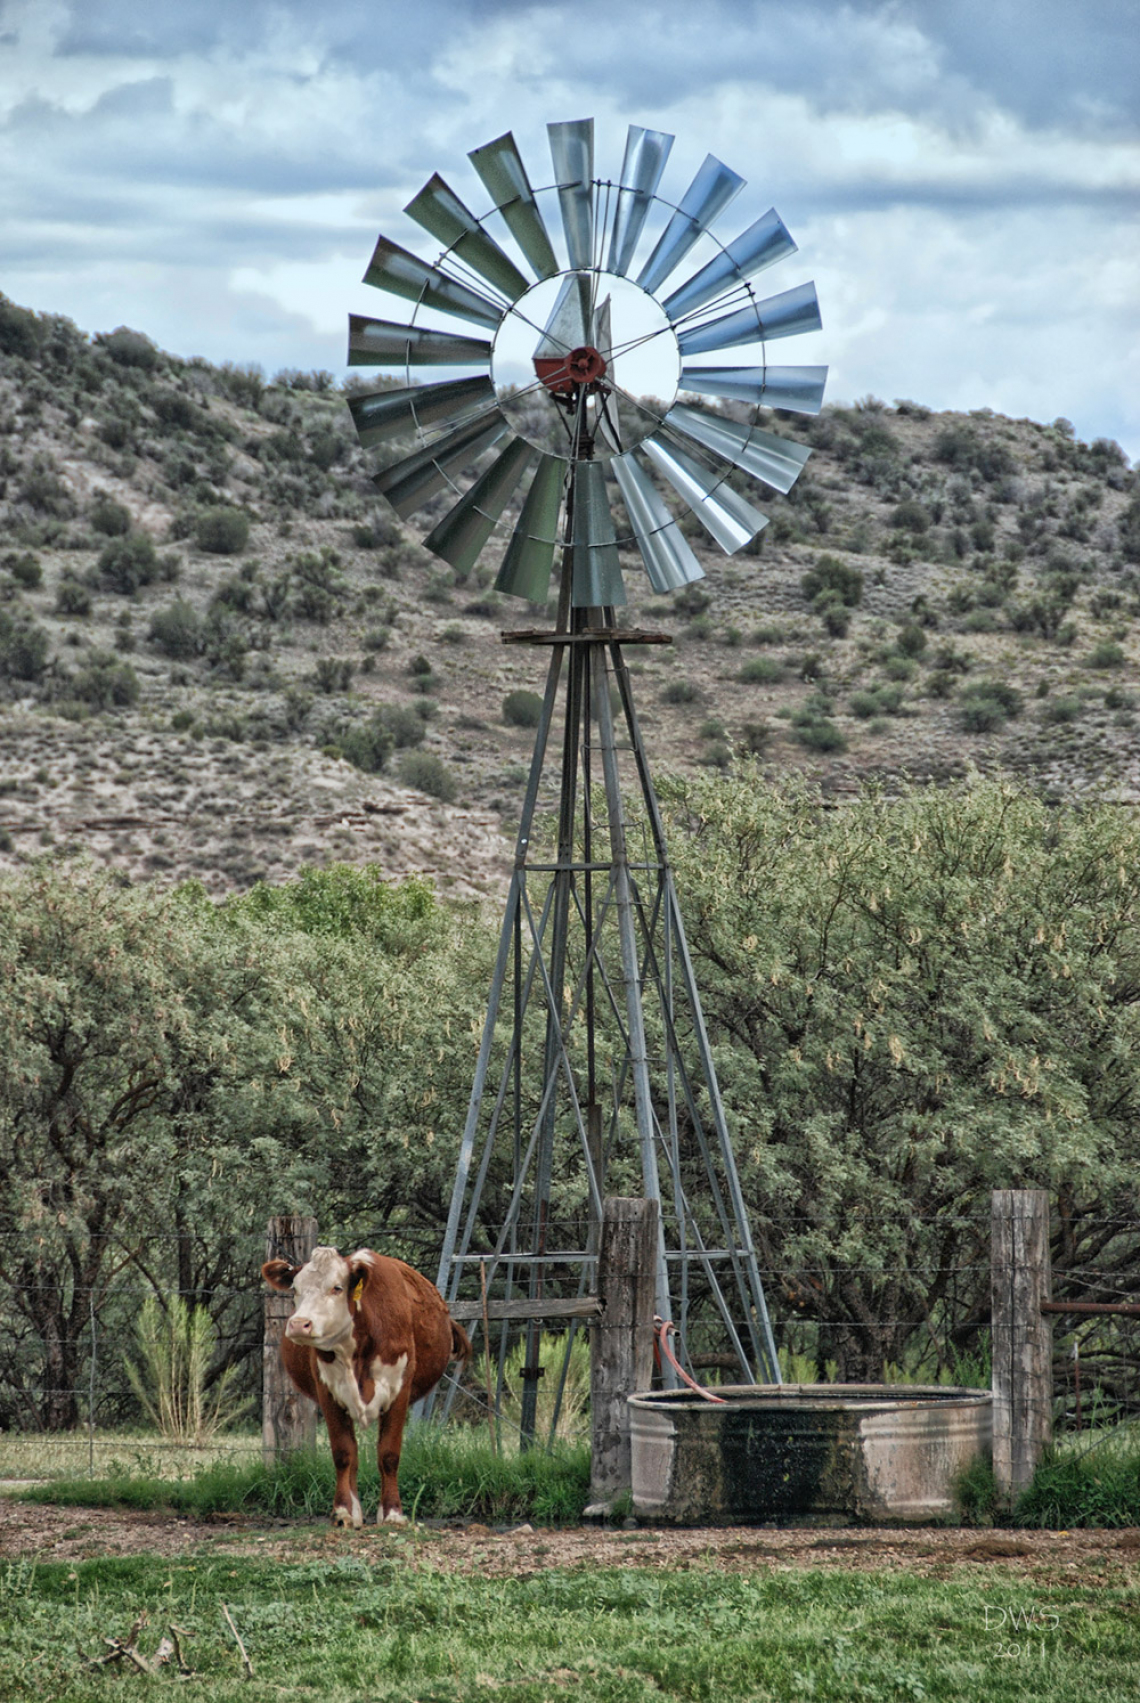 David Schafer - Waiting by the Windmill, Camp Verde